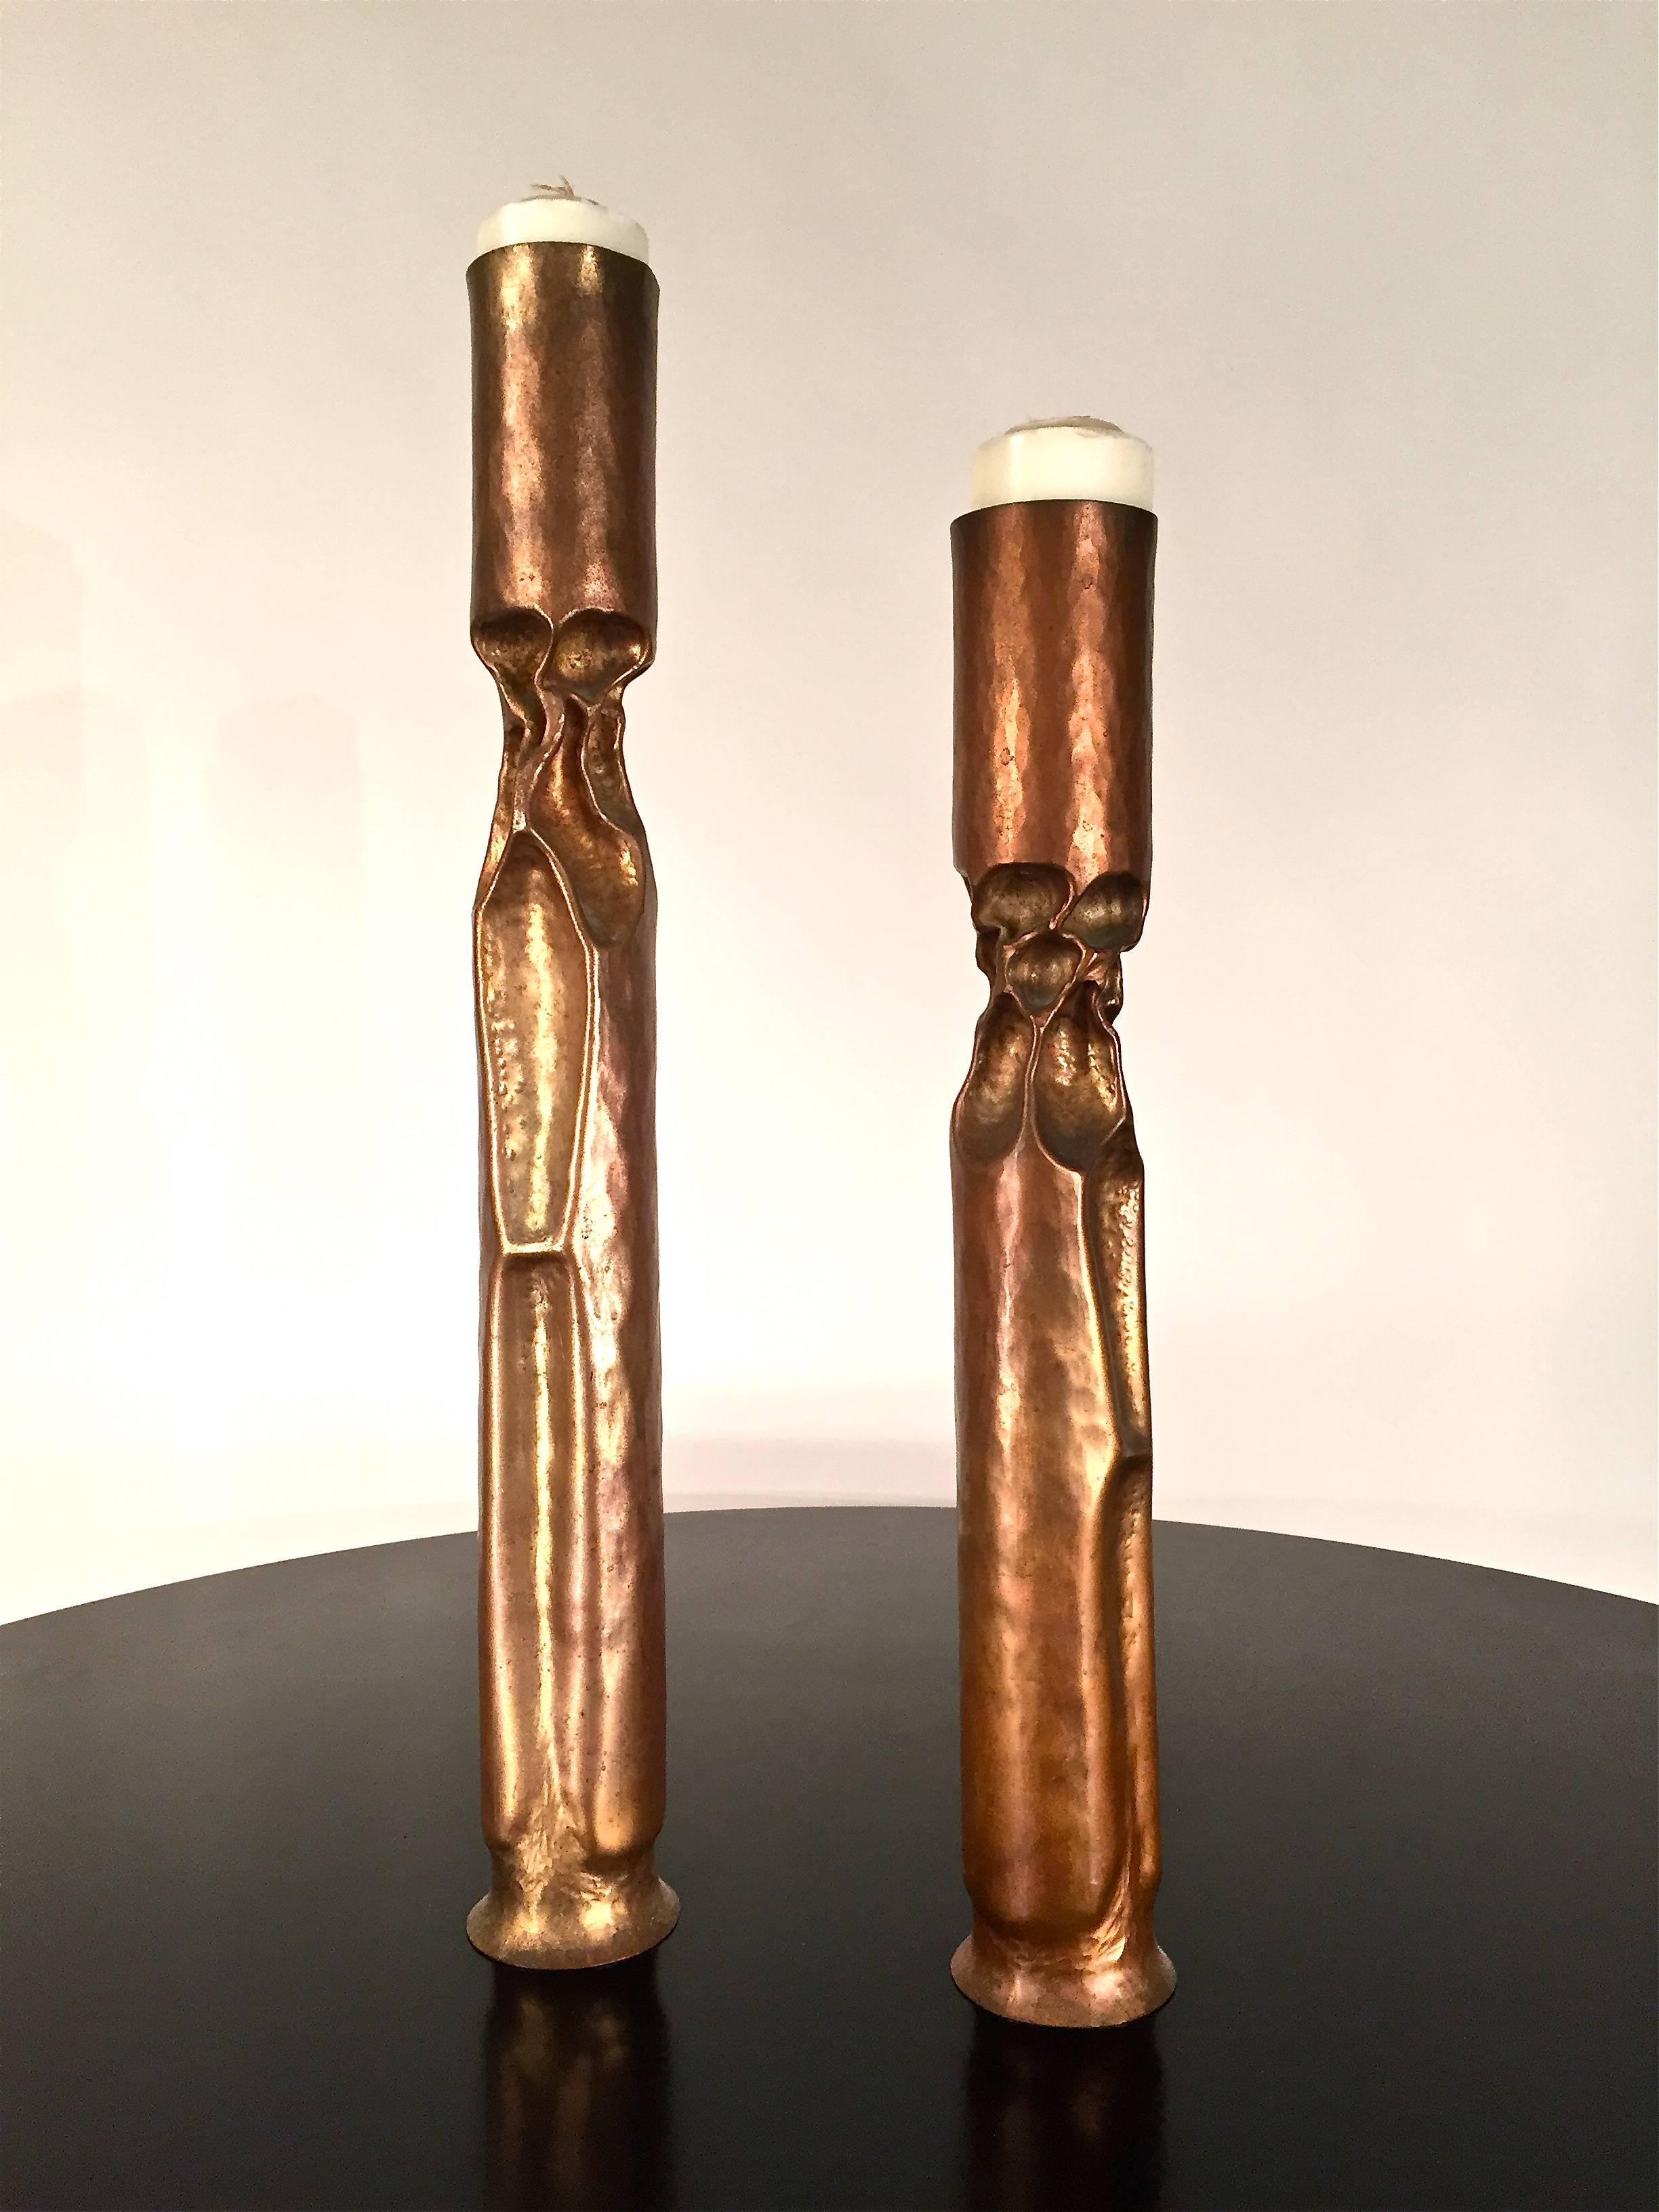 Two metal and copper candlesticks by Thomas Roy Markusen, American, 1980s.